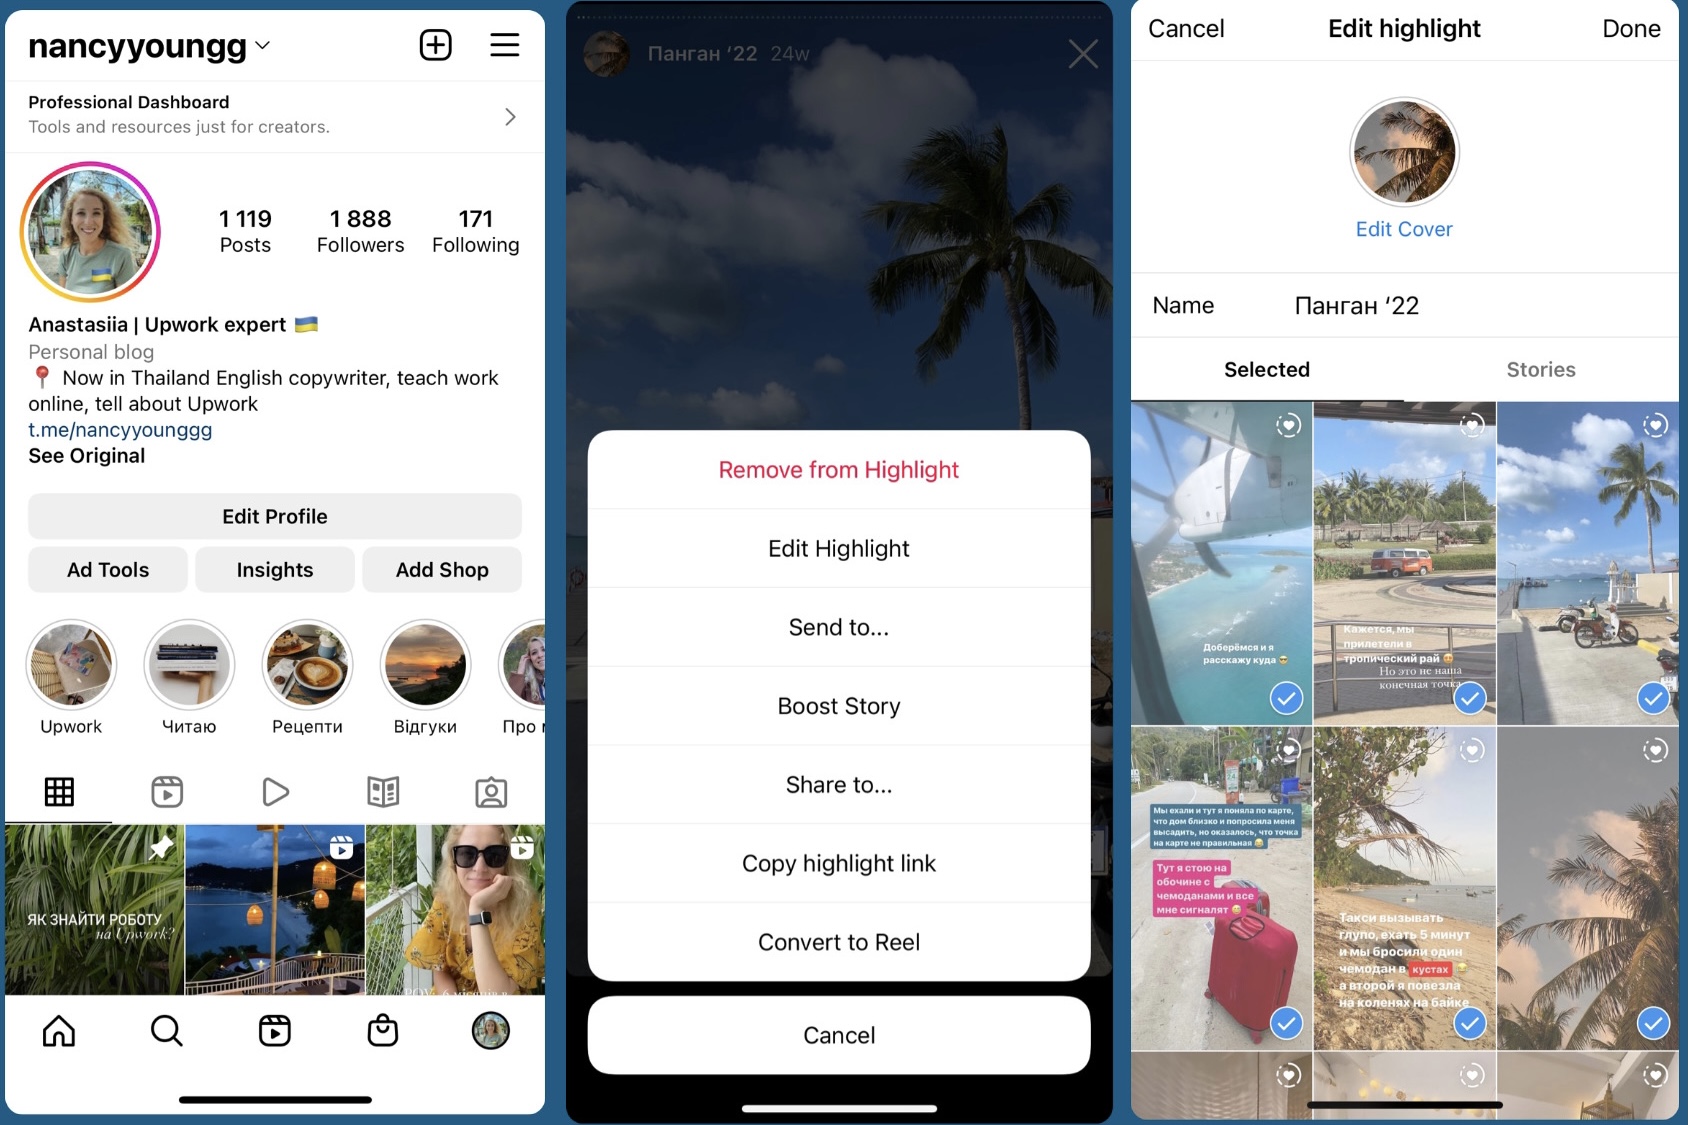 How To Add Instagram Highlights Cover Without Posting To Stories